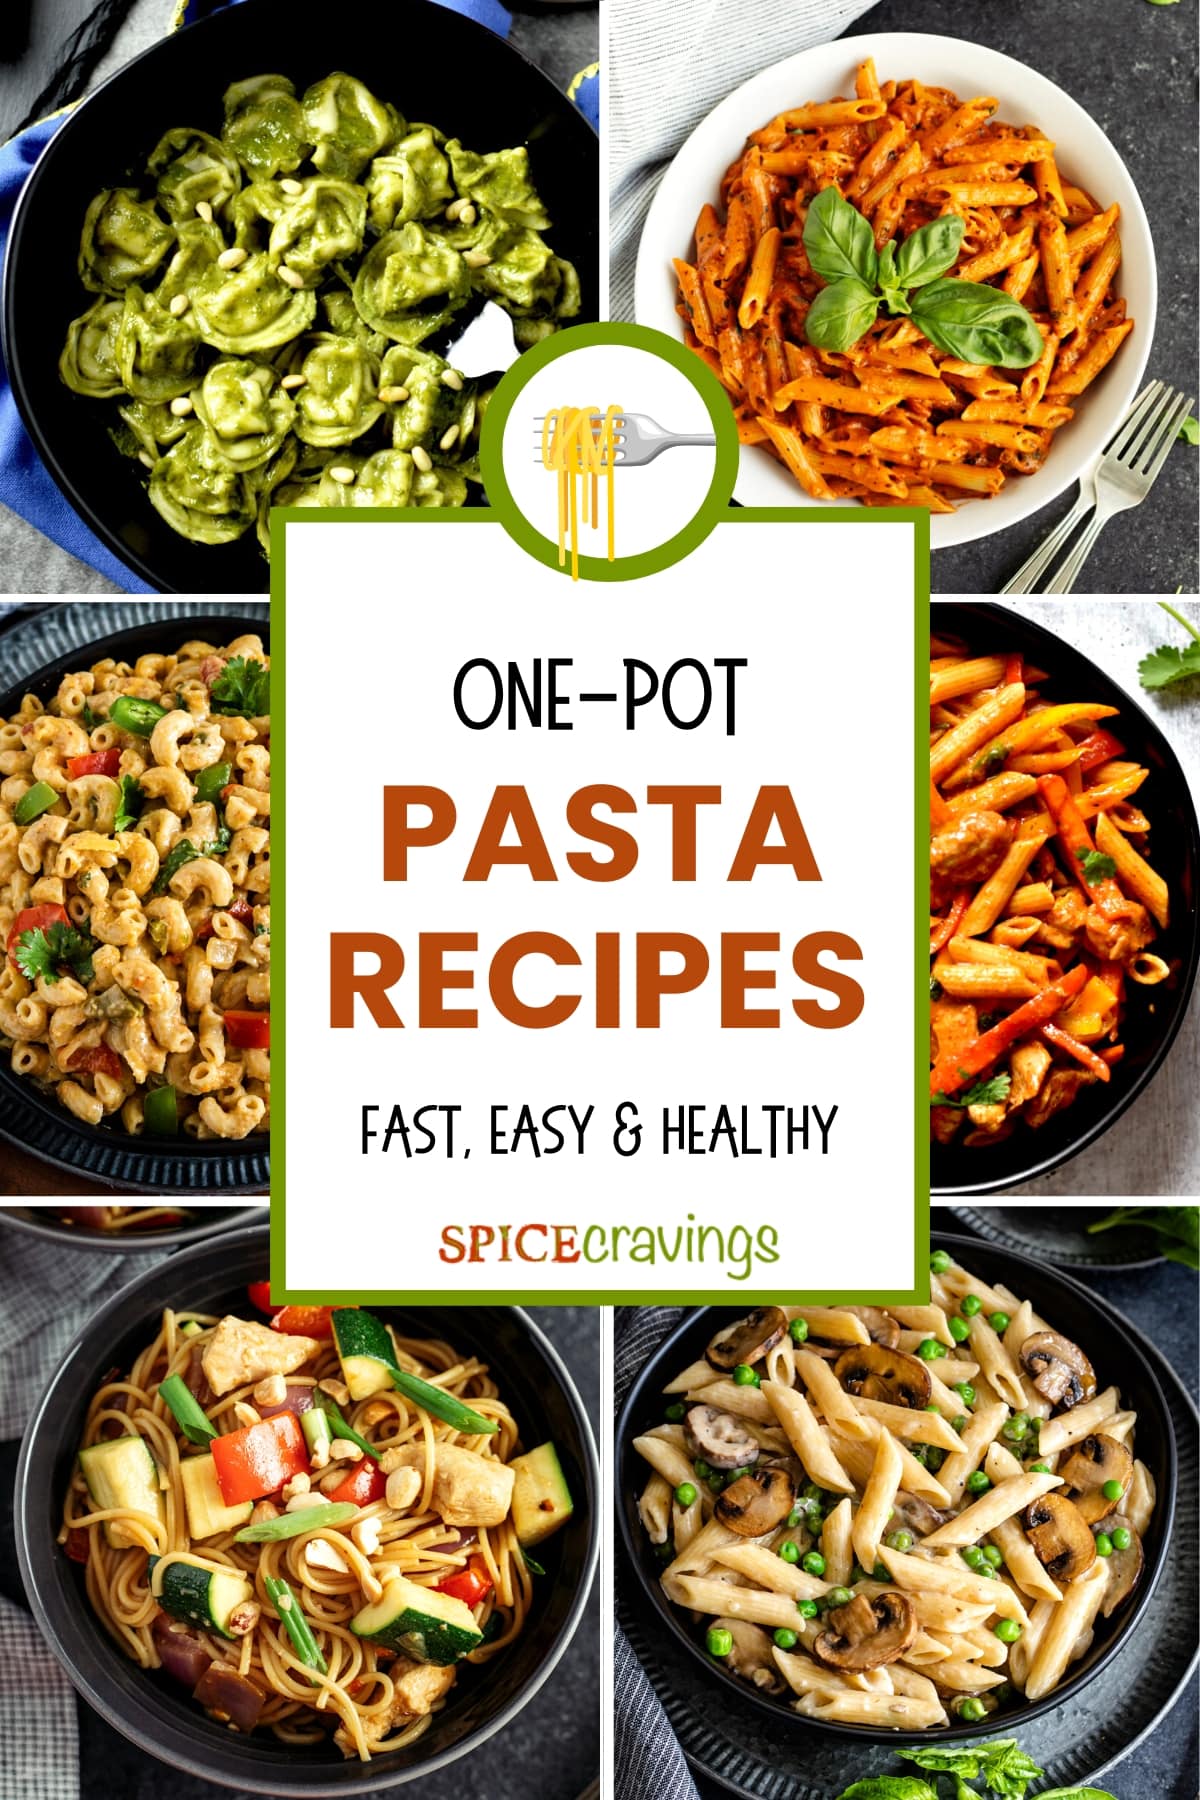 6-image grid with pasta recipes with the title "one pot pasta recipes"